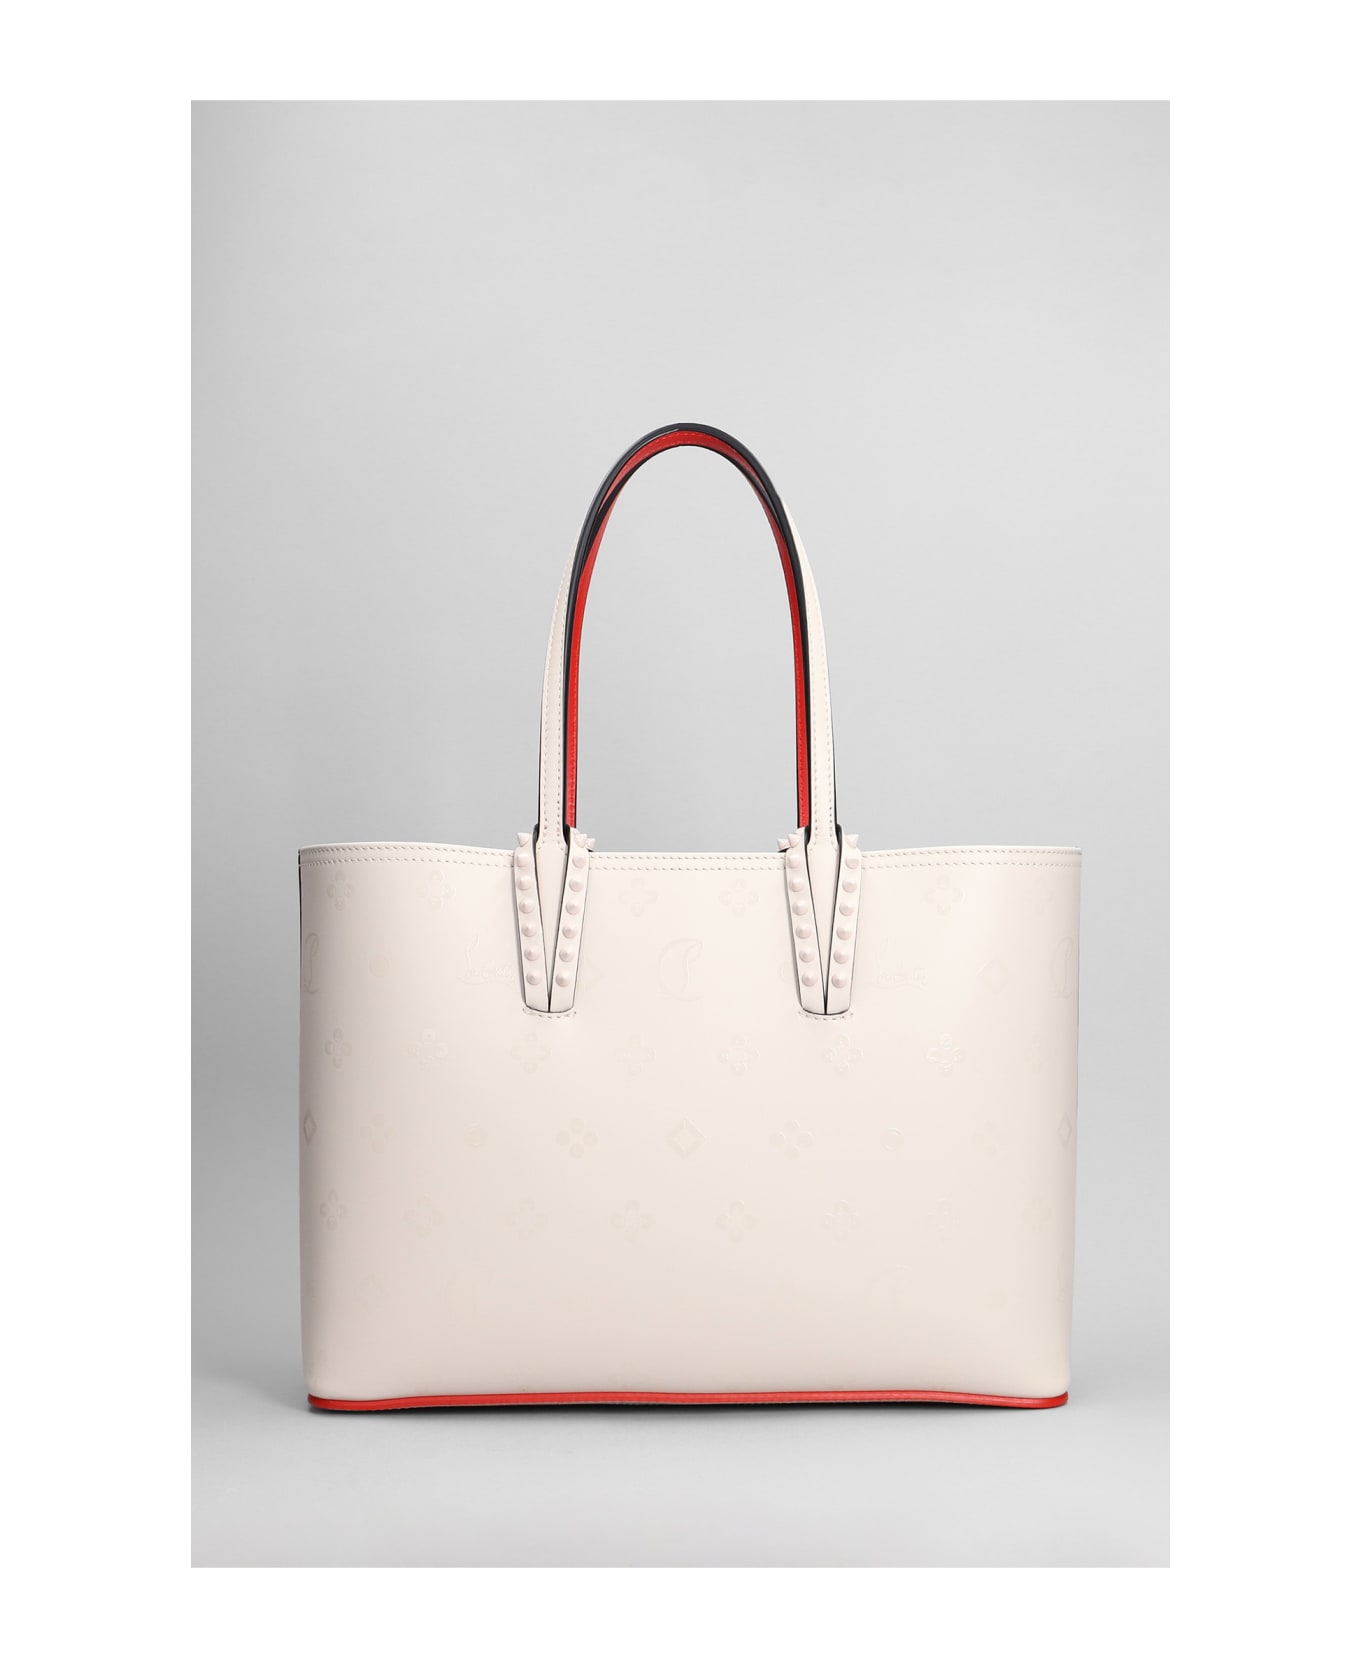 Christian Louboutin Cabata Small Tote In Rose-pink Leather - rose-pink